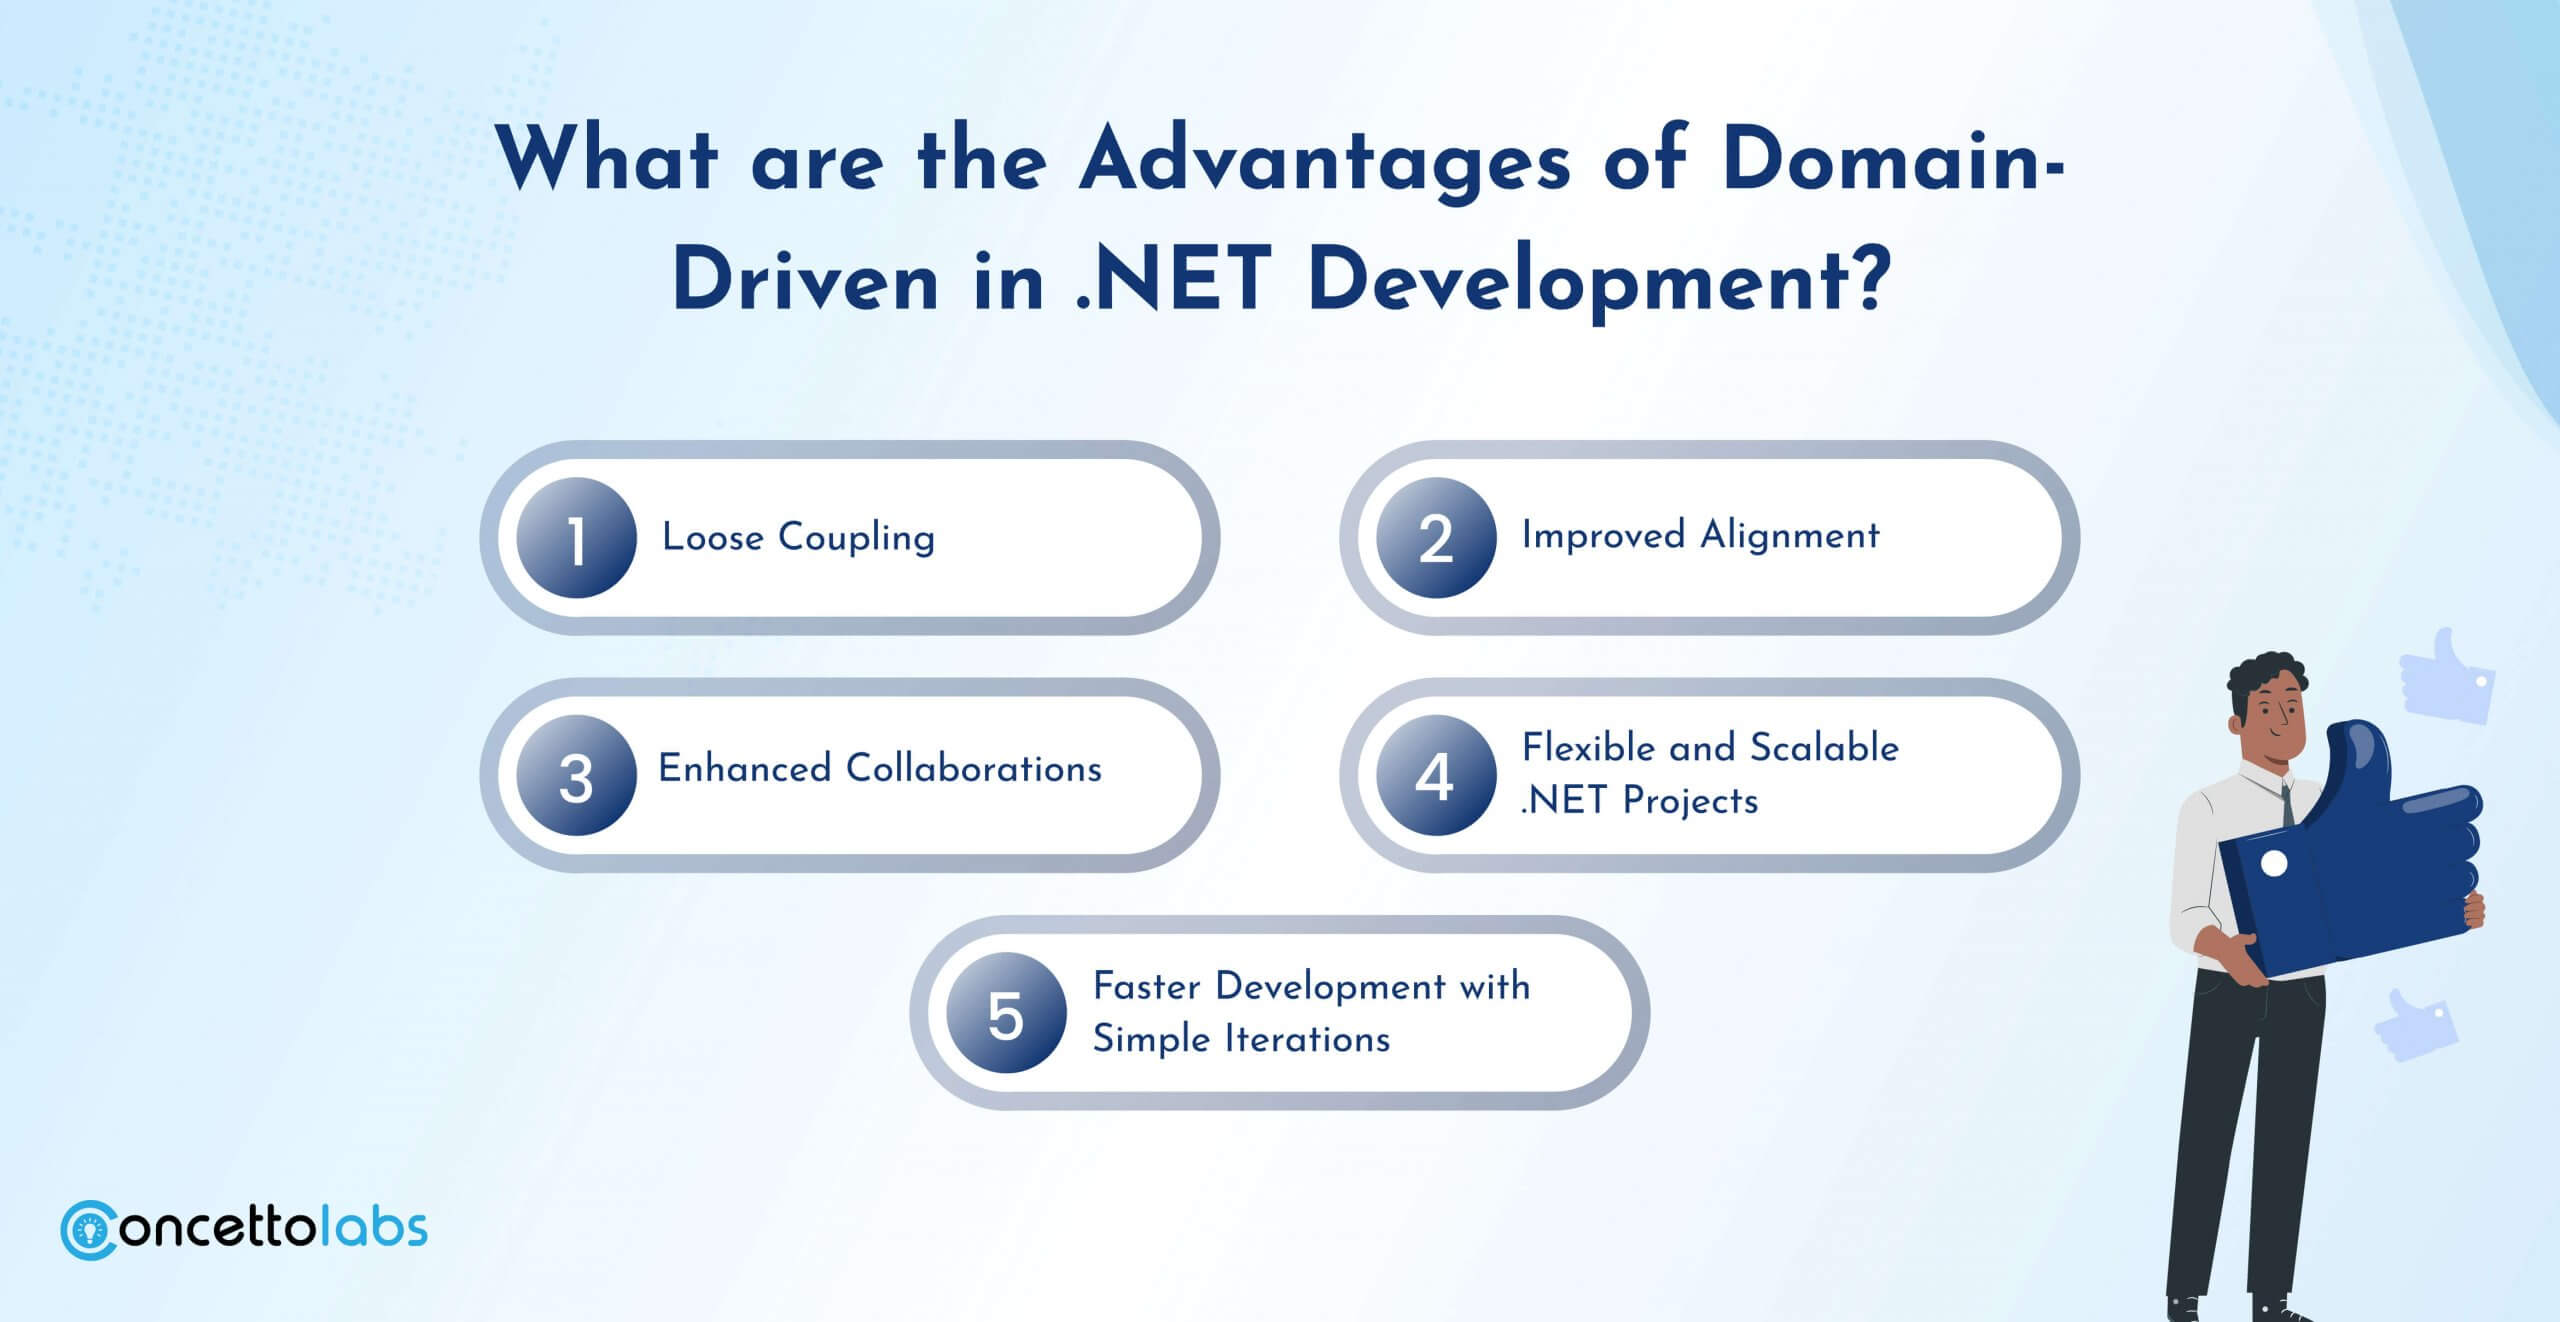 What are the Advantages of Domain-Driven in .NET Development?